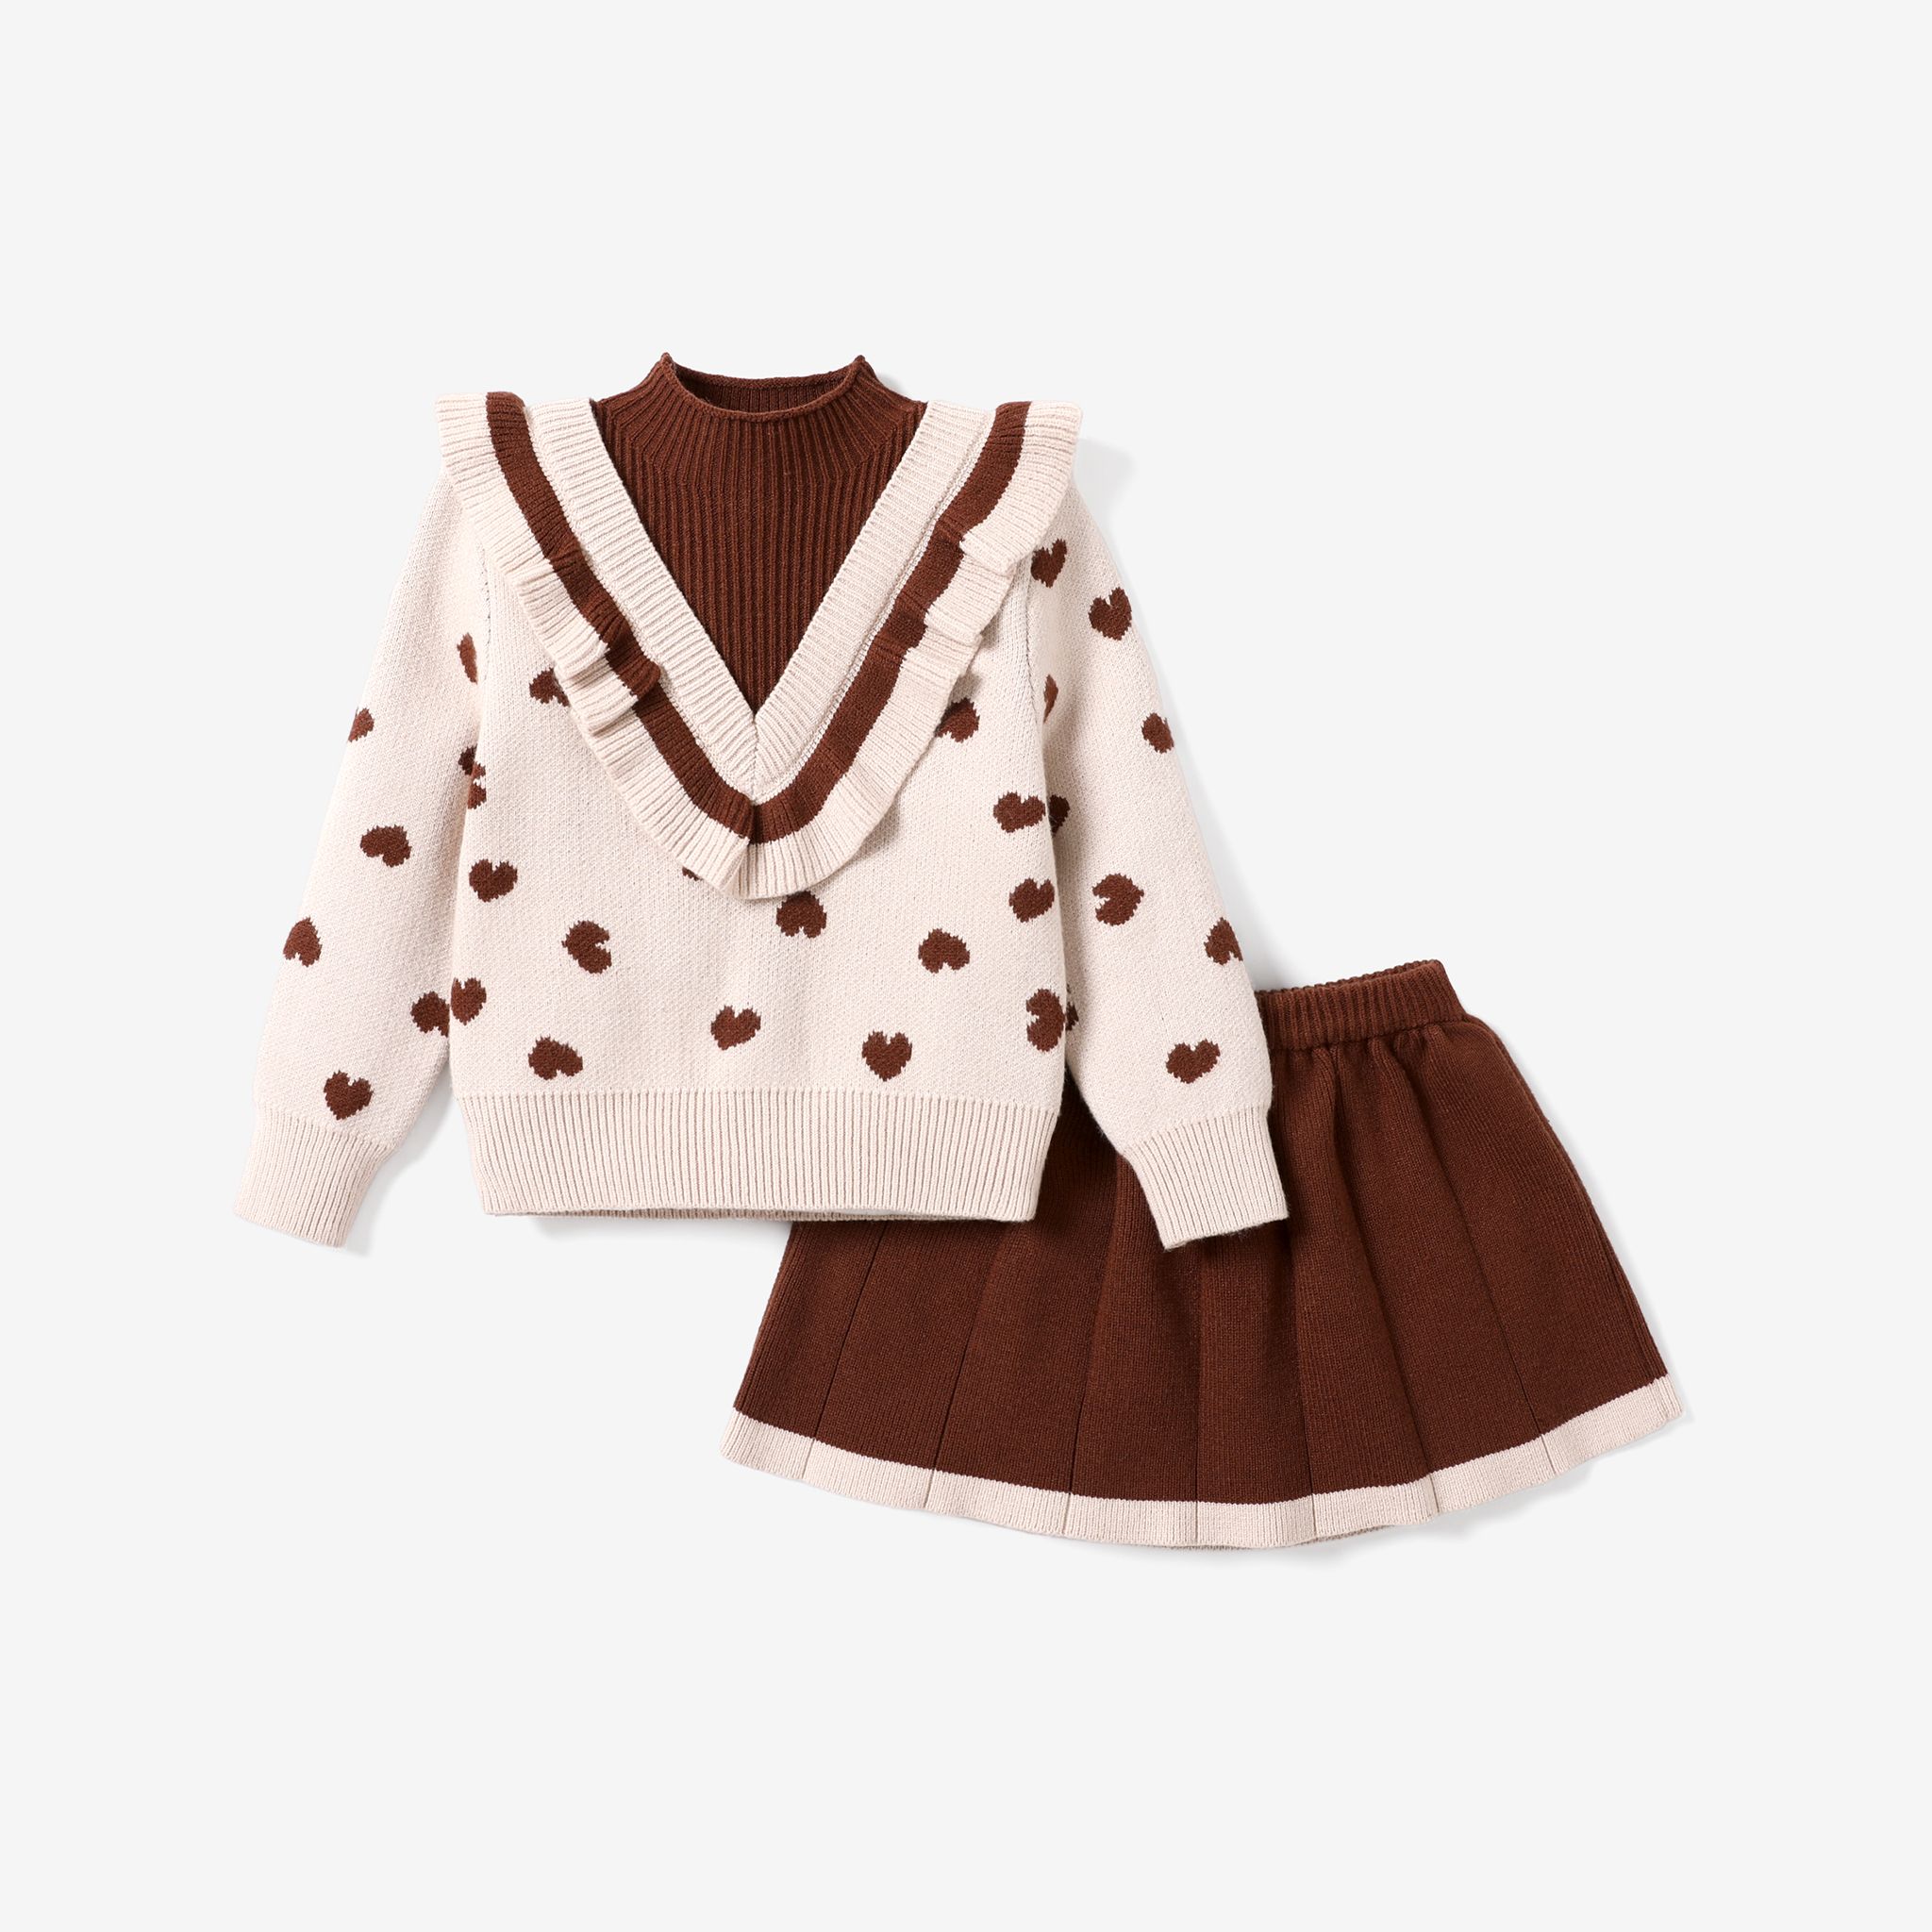 Toddler Girl Valentine's Day 2pcs Heart-shaped Sweater And Skirt Set/ Princess Shoes